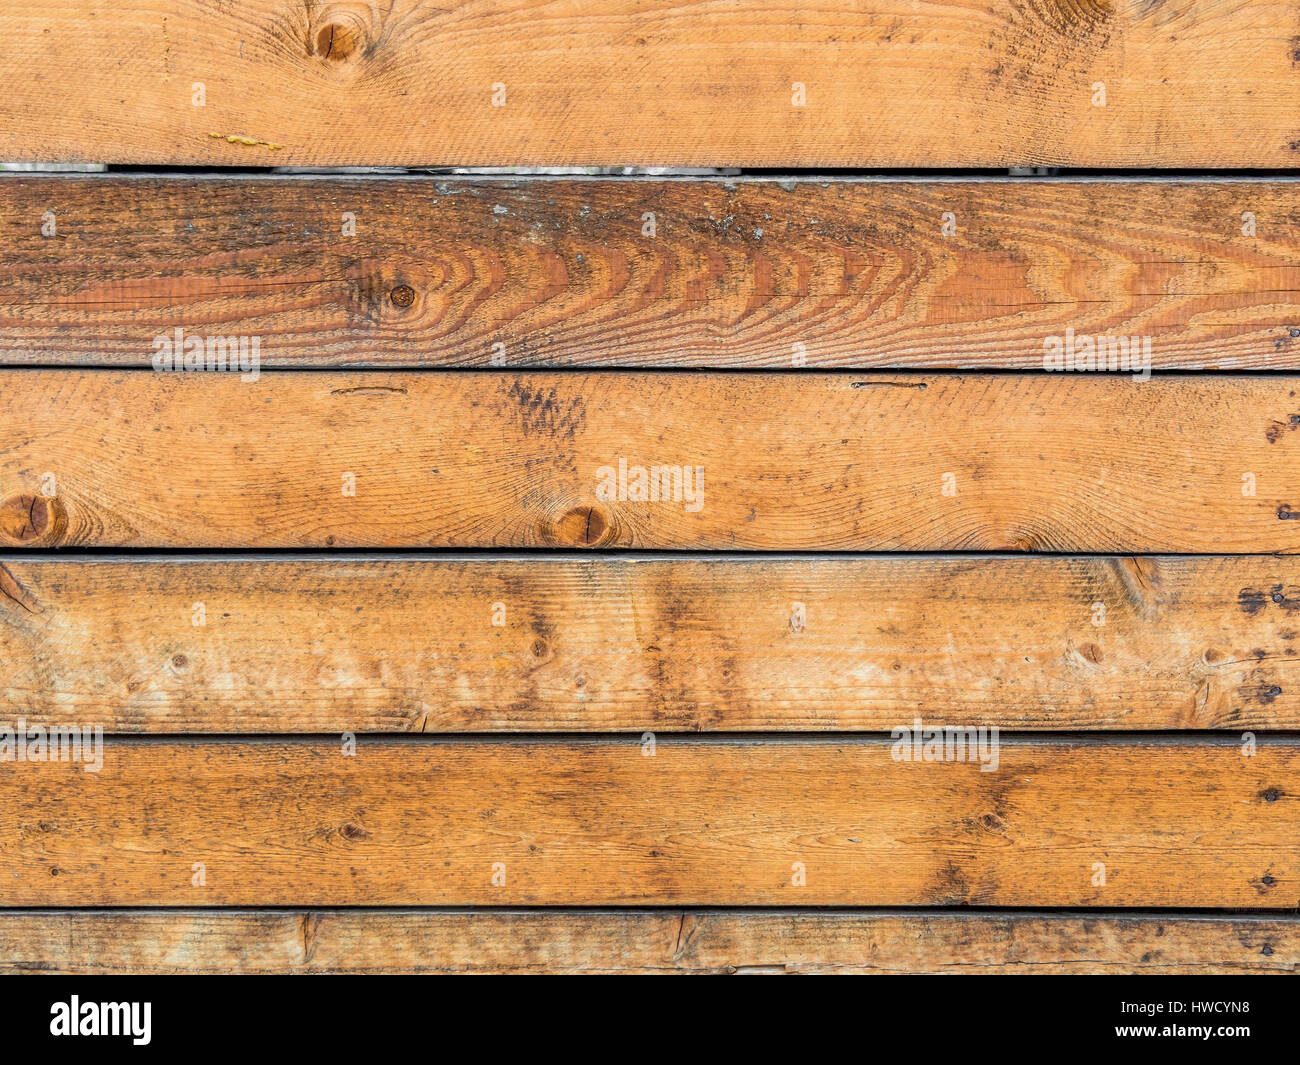 A wall from wooden slats with text clearance. Wooden wall as a Huintergrund for posters, Eine Wand aus Holzlatten mit Textfreiraum. Holzwand als Huint Stock Photo